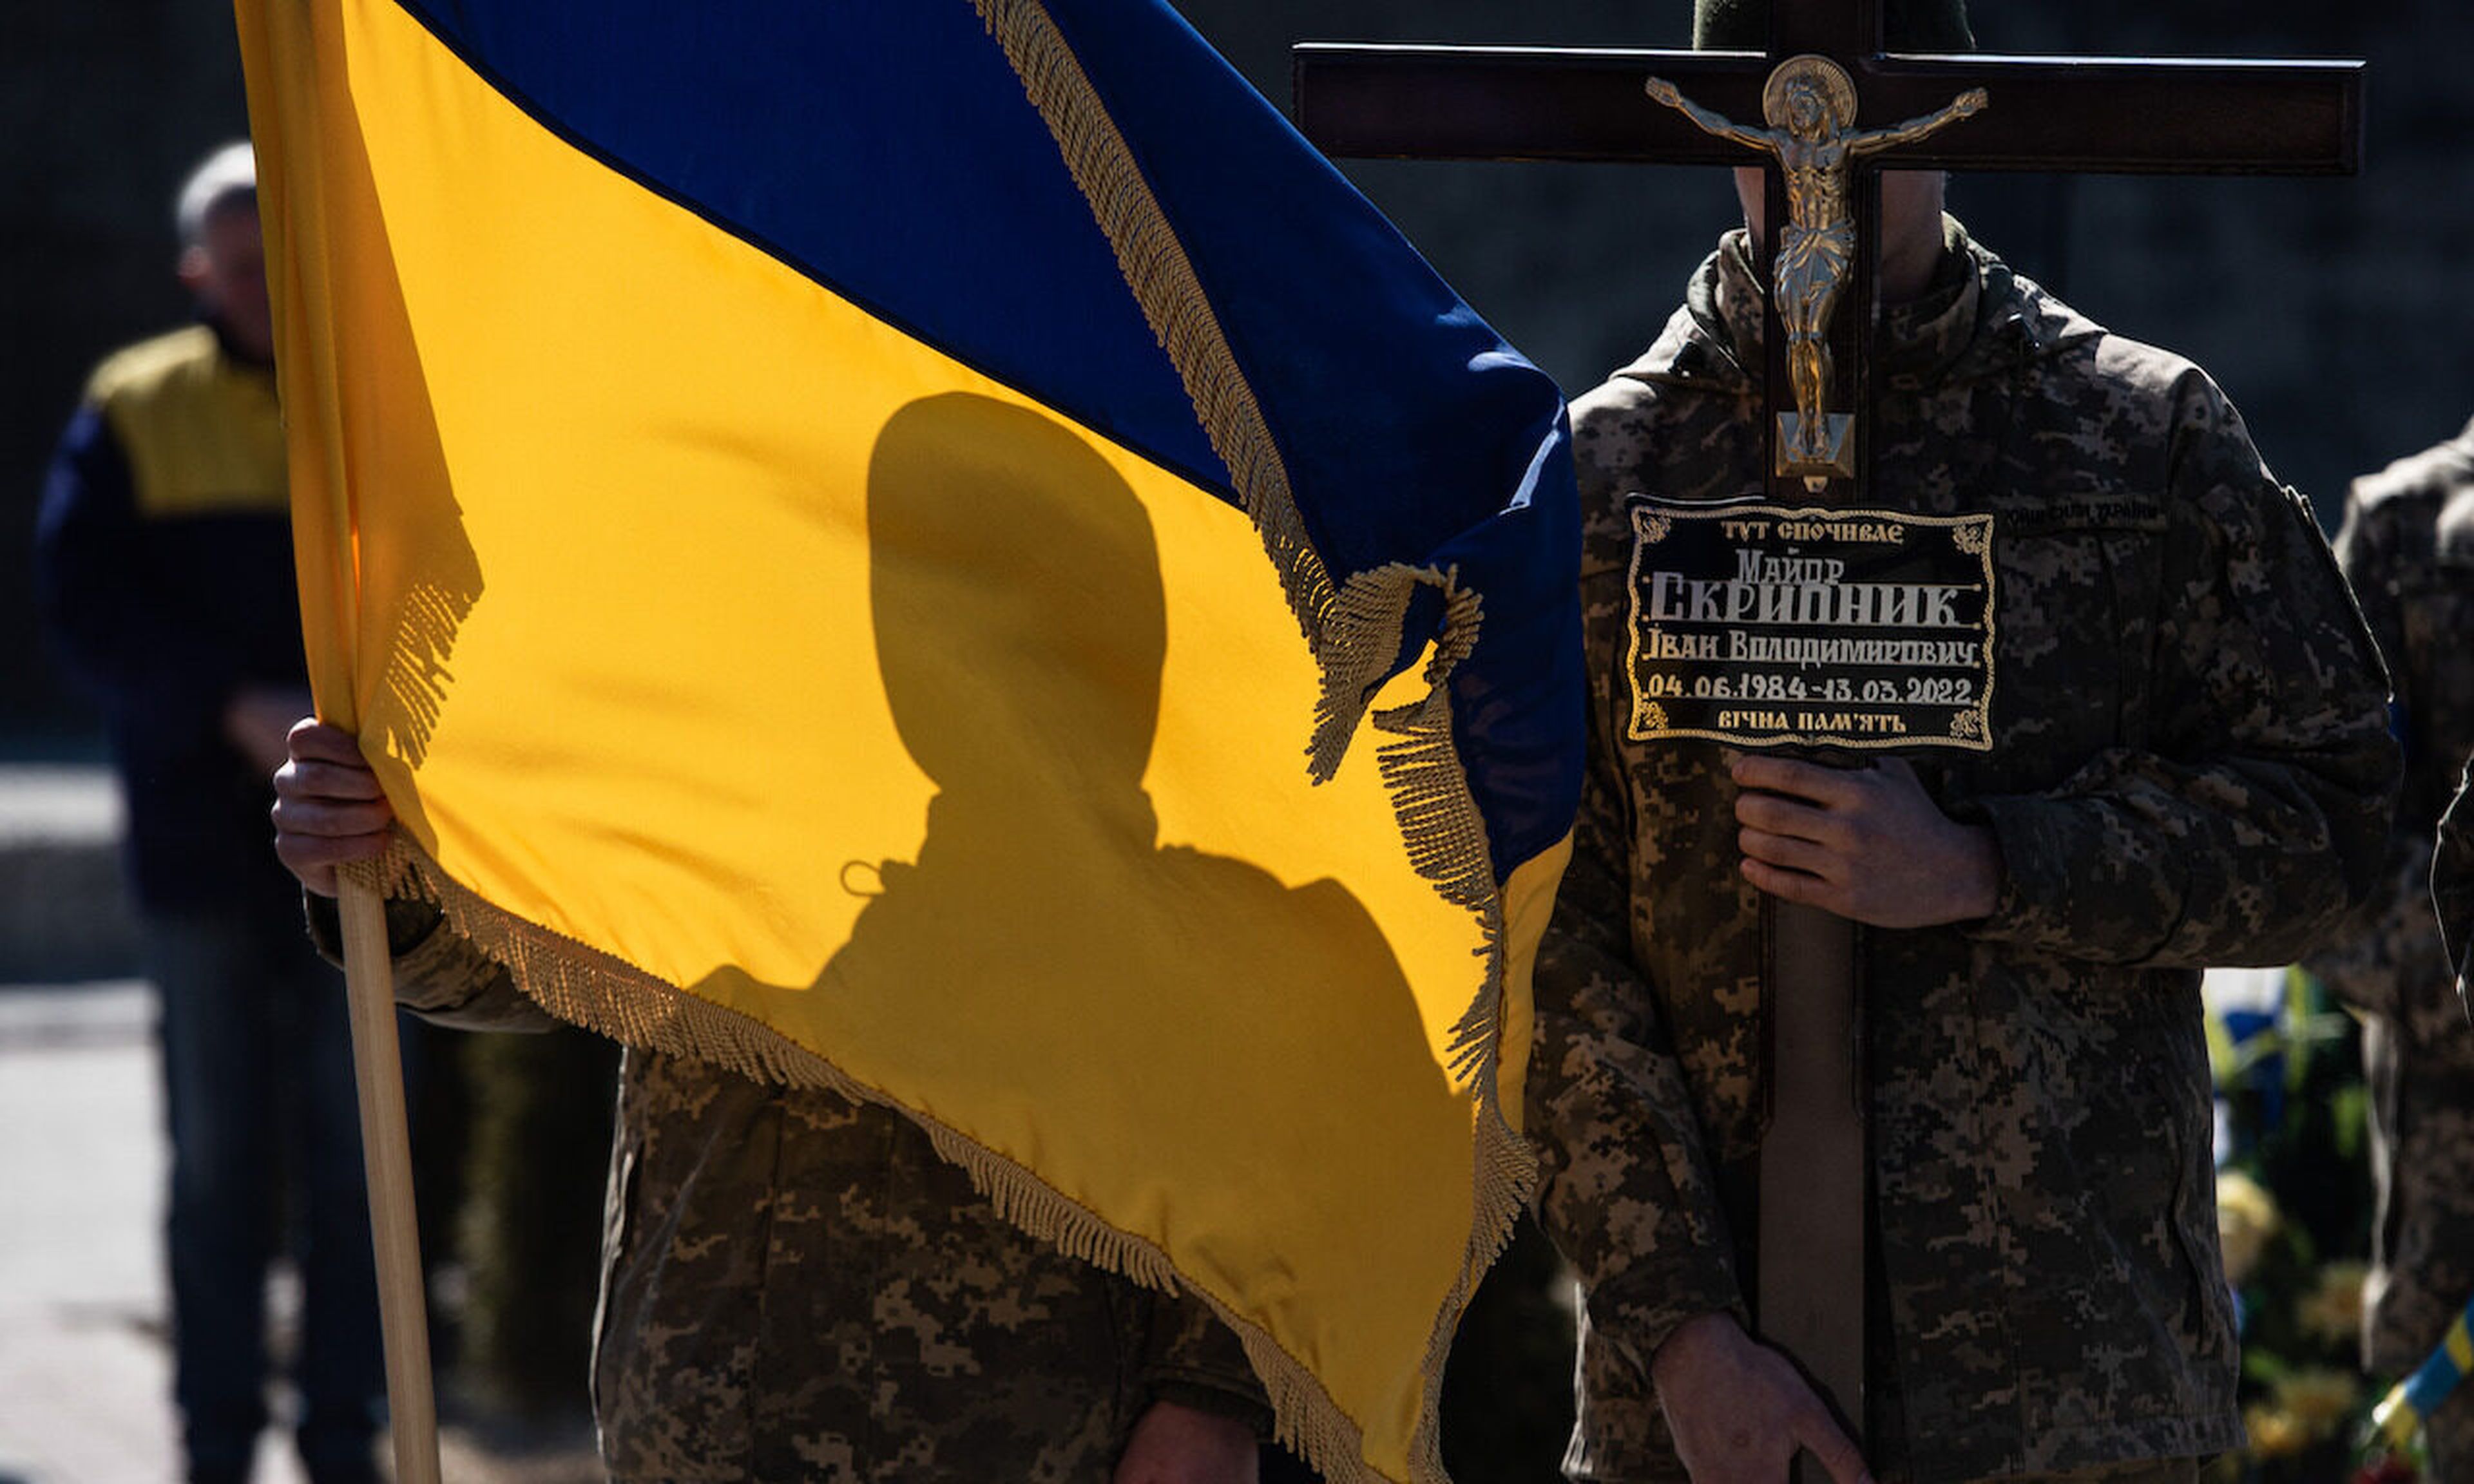 Ukrainian servicemen hold a national Ukrainian flag and a cross during the funeral ceremony on March 17, 2022 in Lviv, Ukraine. (Photo by Alexey Furman/Getty Images)